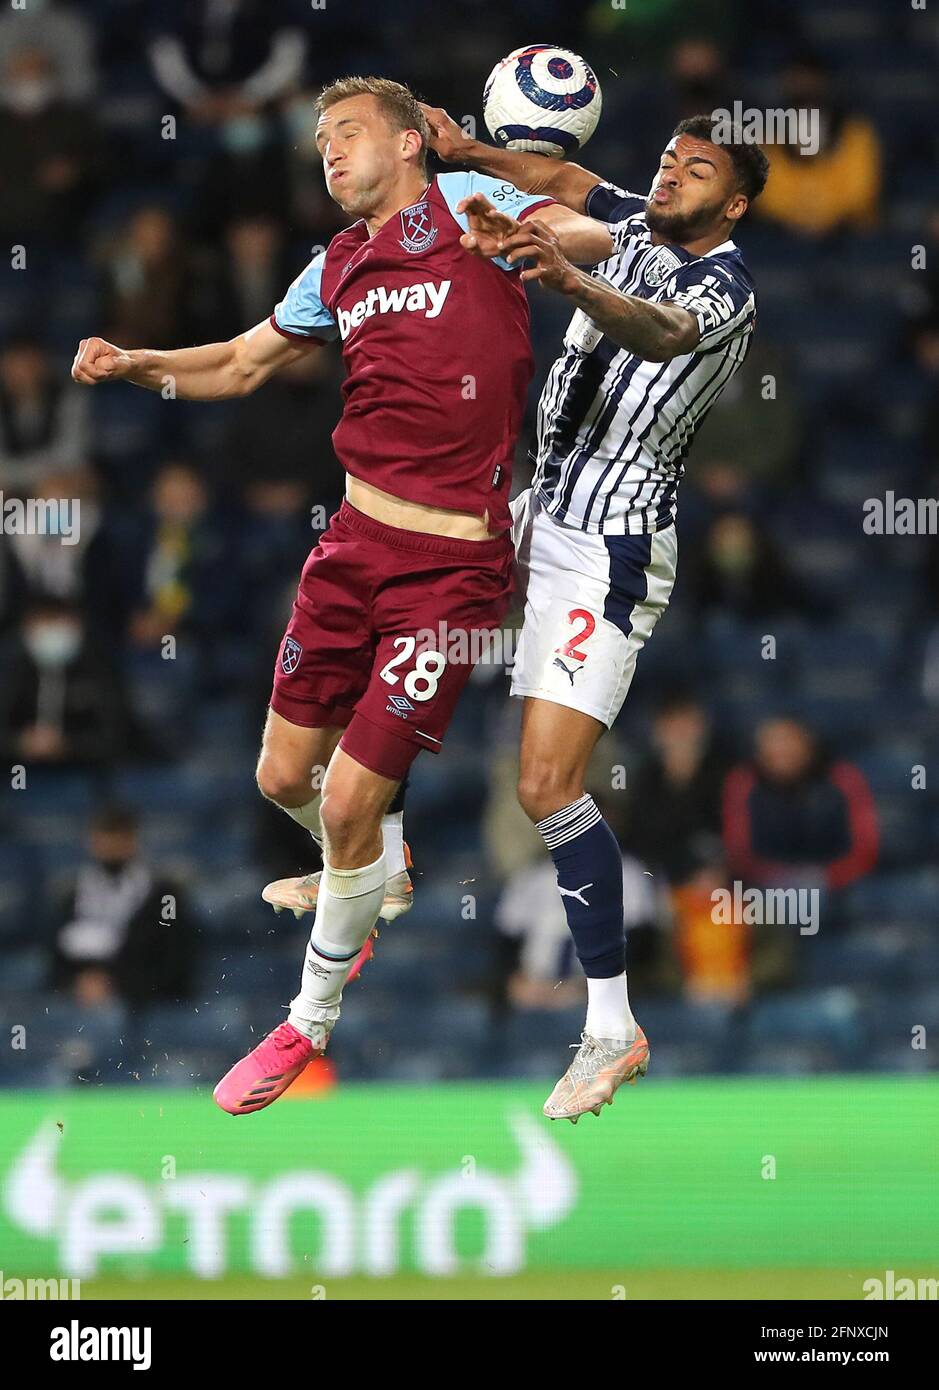 West Ham United's Tomas Soucek (left) and West Bromwich Albion's Darnell Furlong battle for the ball during the Premier League match at The Hawthorns, West Bromwich. Picture date: Wednesday May 19, 2021. Stock Photo